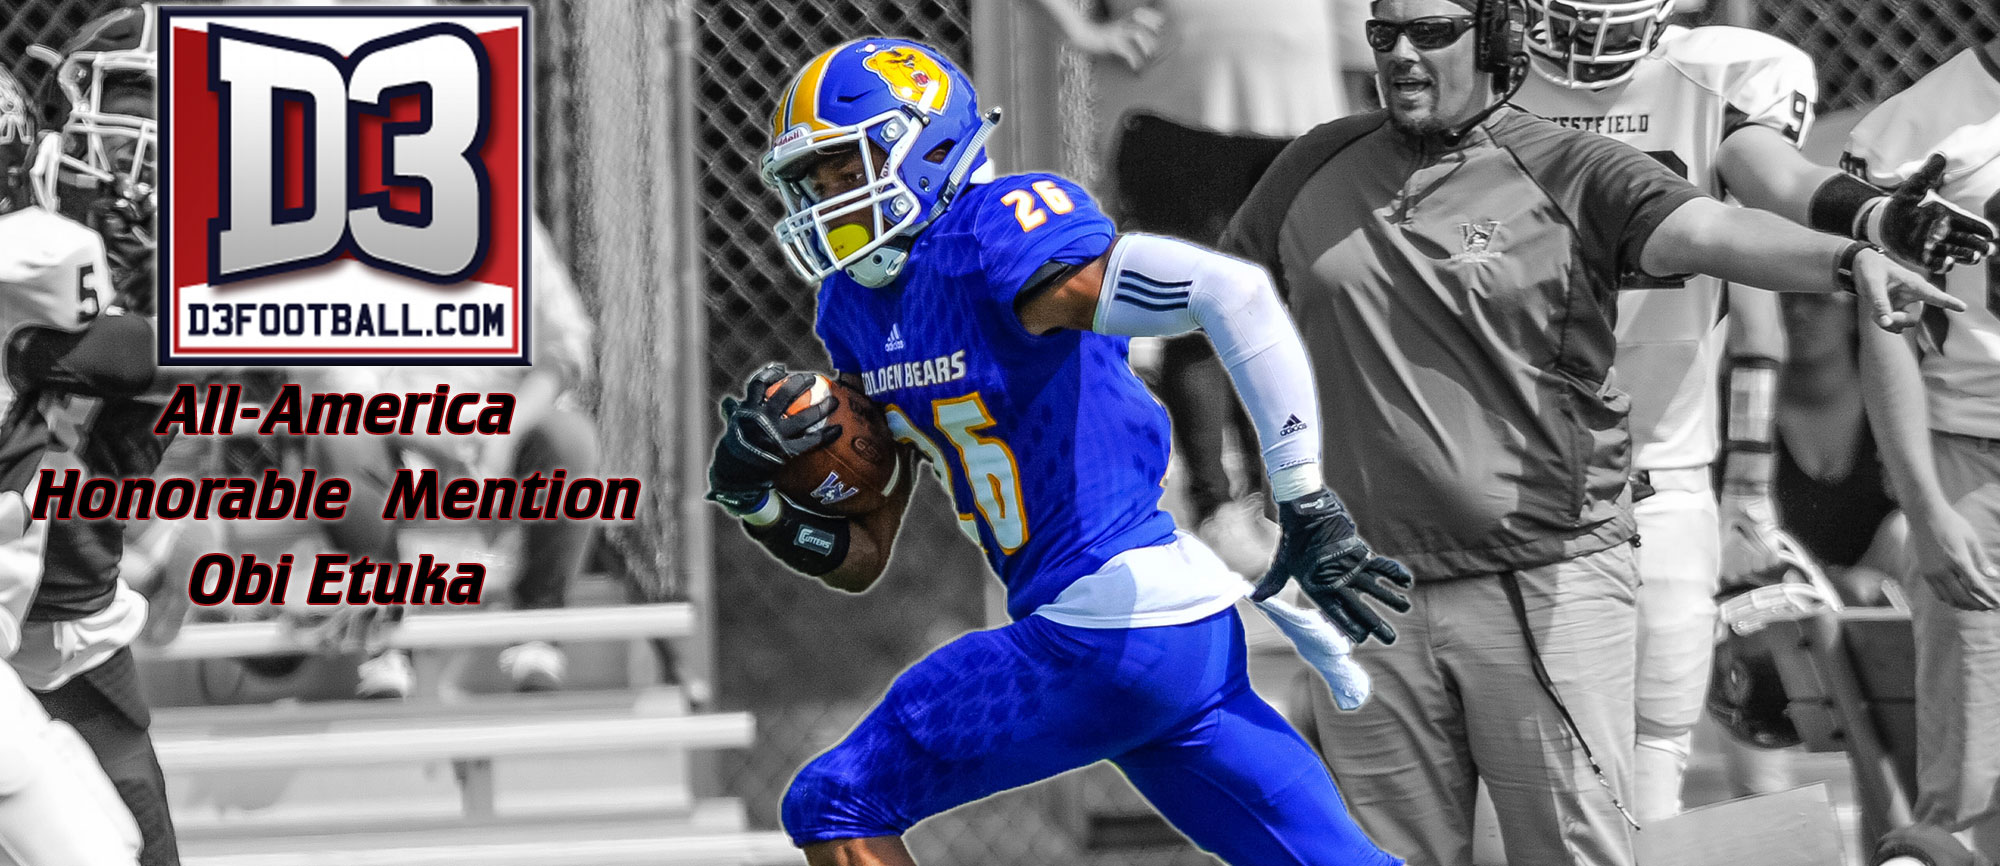 Obi Etuka Named Honorable Mention All-American by D3football.com